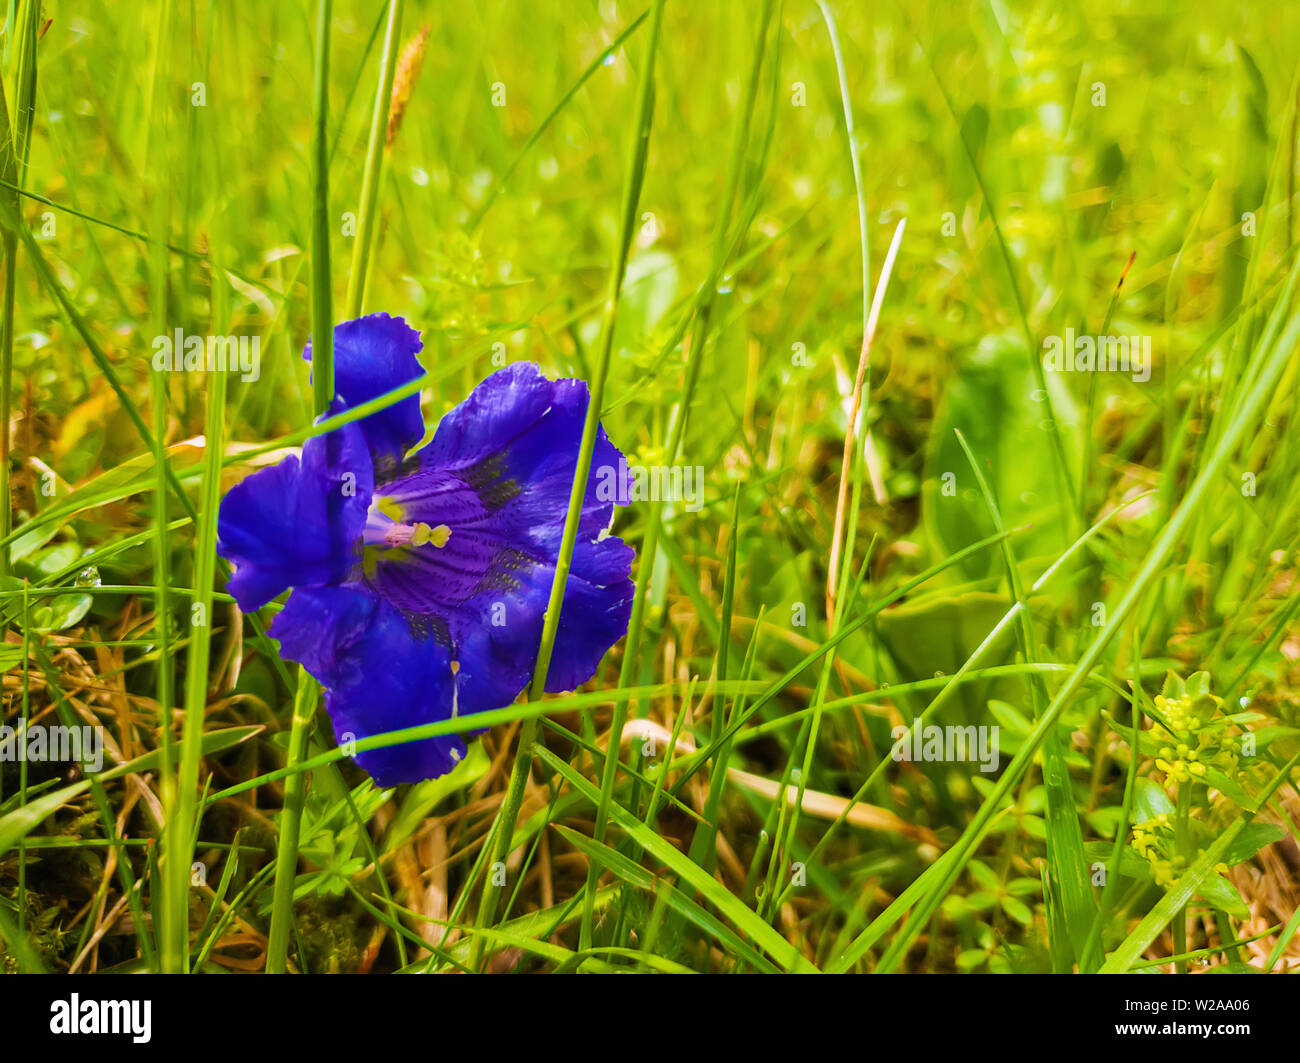 Close up of single blue enzian flower (Gentiana acaulis) in the green grass of Carpathians wild hills. Spring blooming and vegetation. Stock Photo